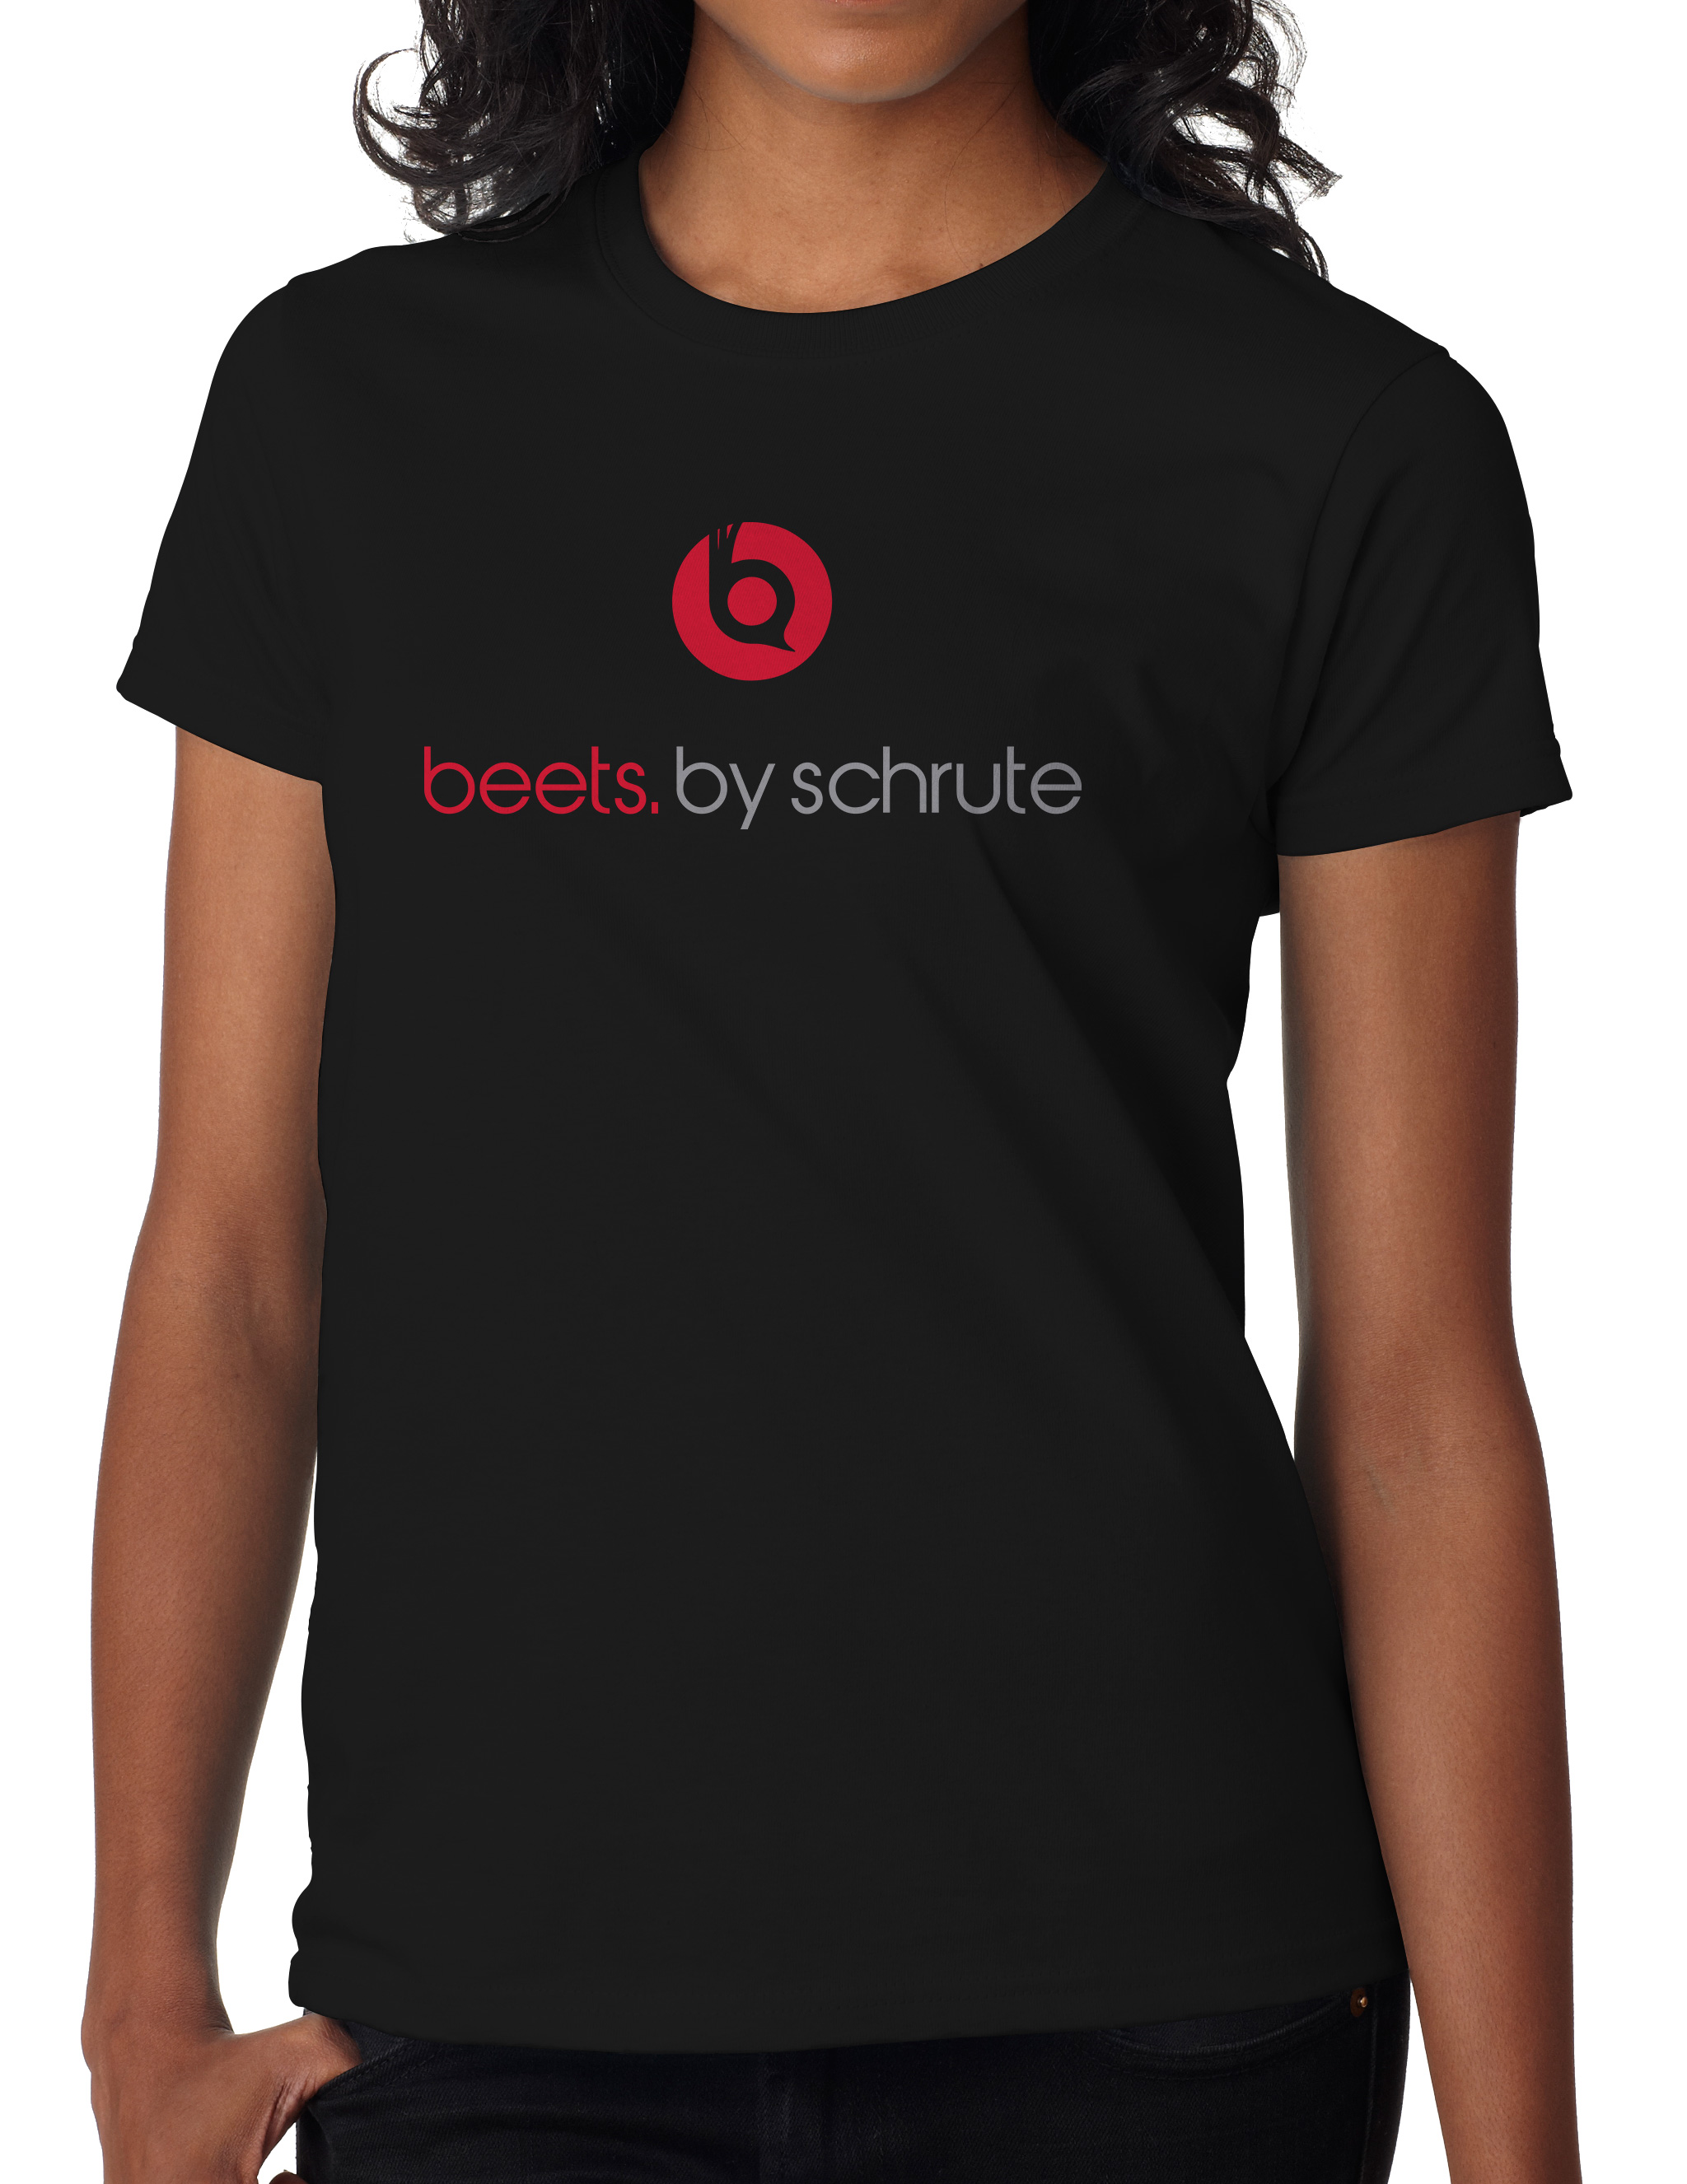 Womens Schrute Farms Beets Short-Sleeve Crewneck T-Shirt Print Tees Shirt Short Sleeve T Shirt Blouse Tops Black 